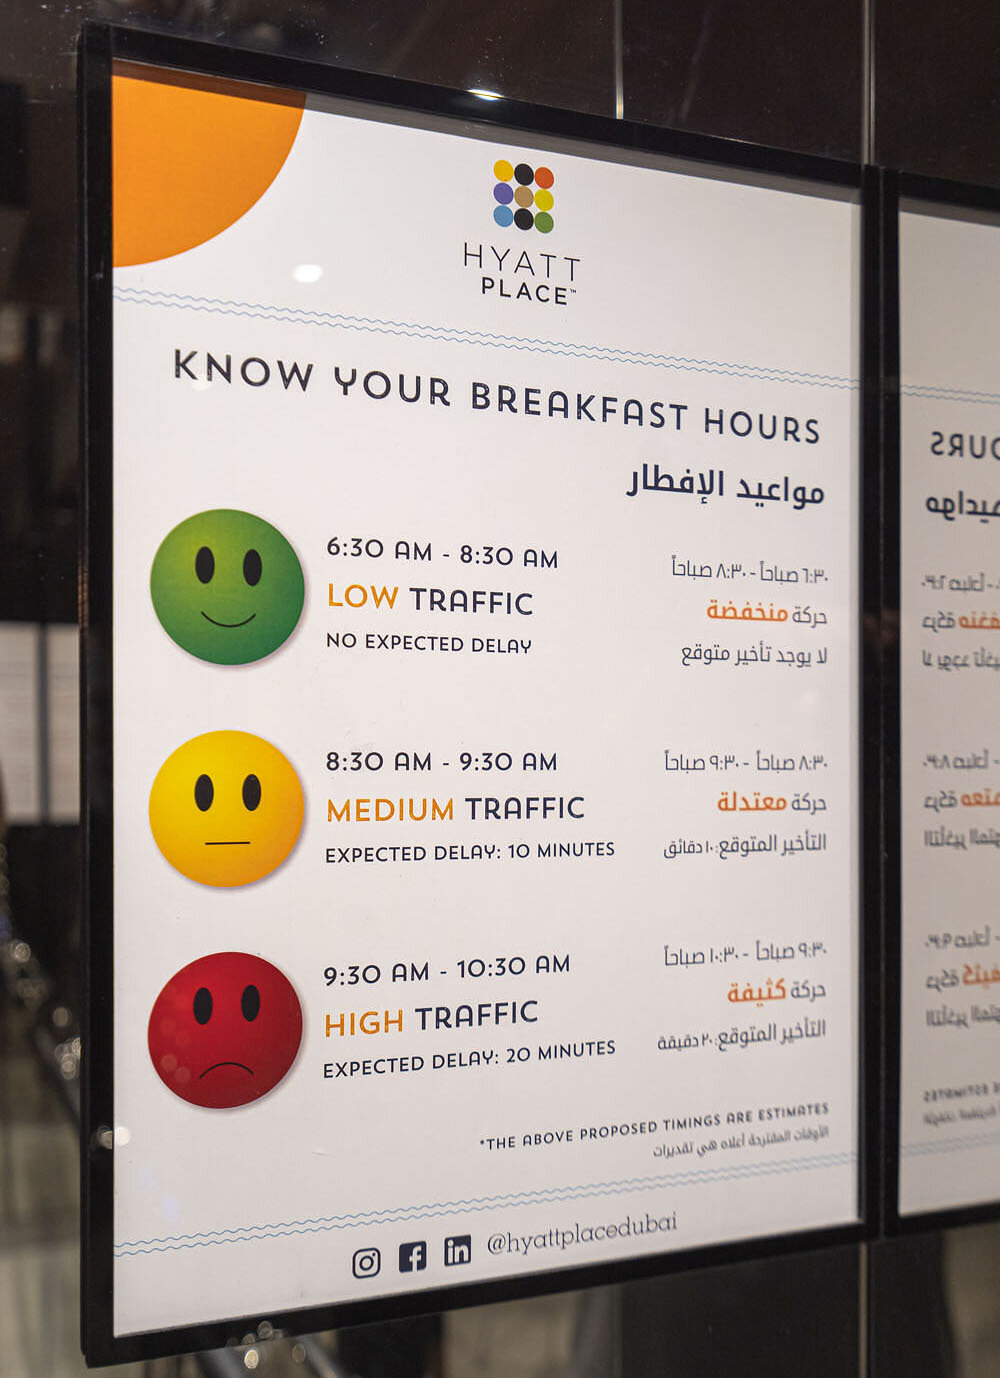  Recommended breakfast hours 